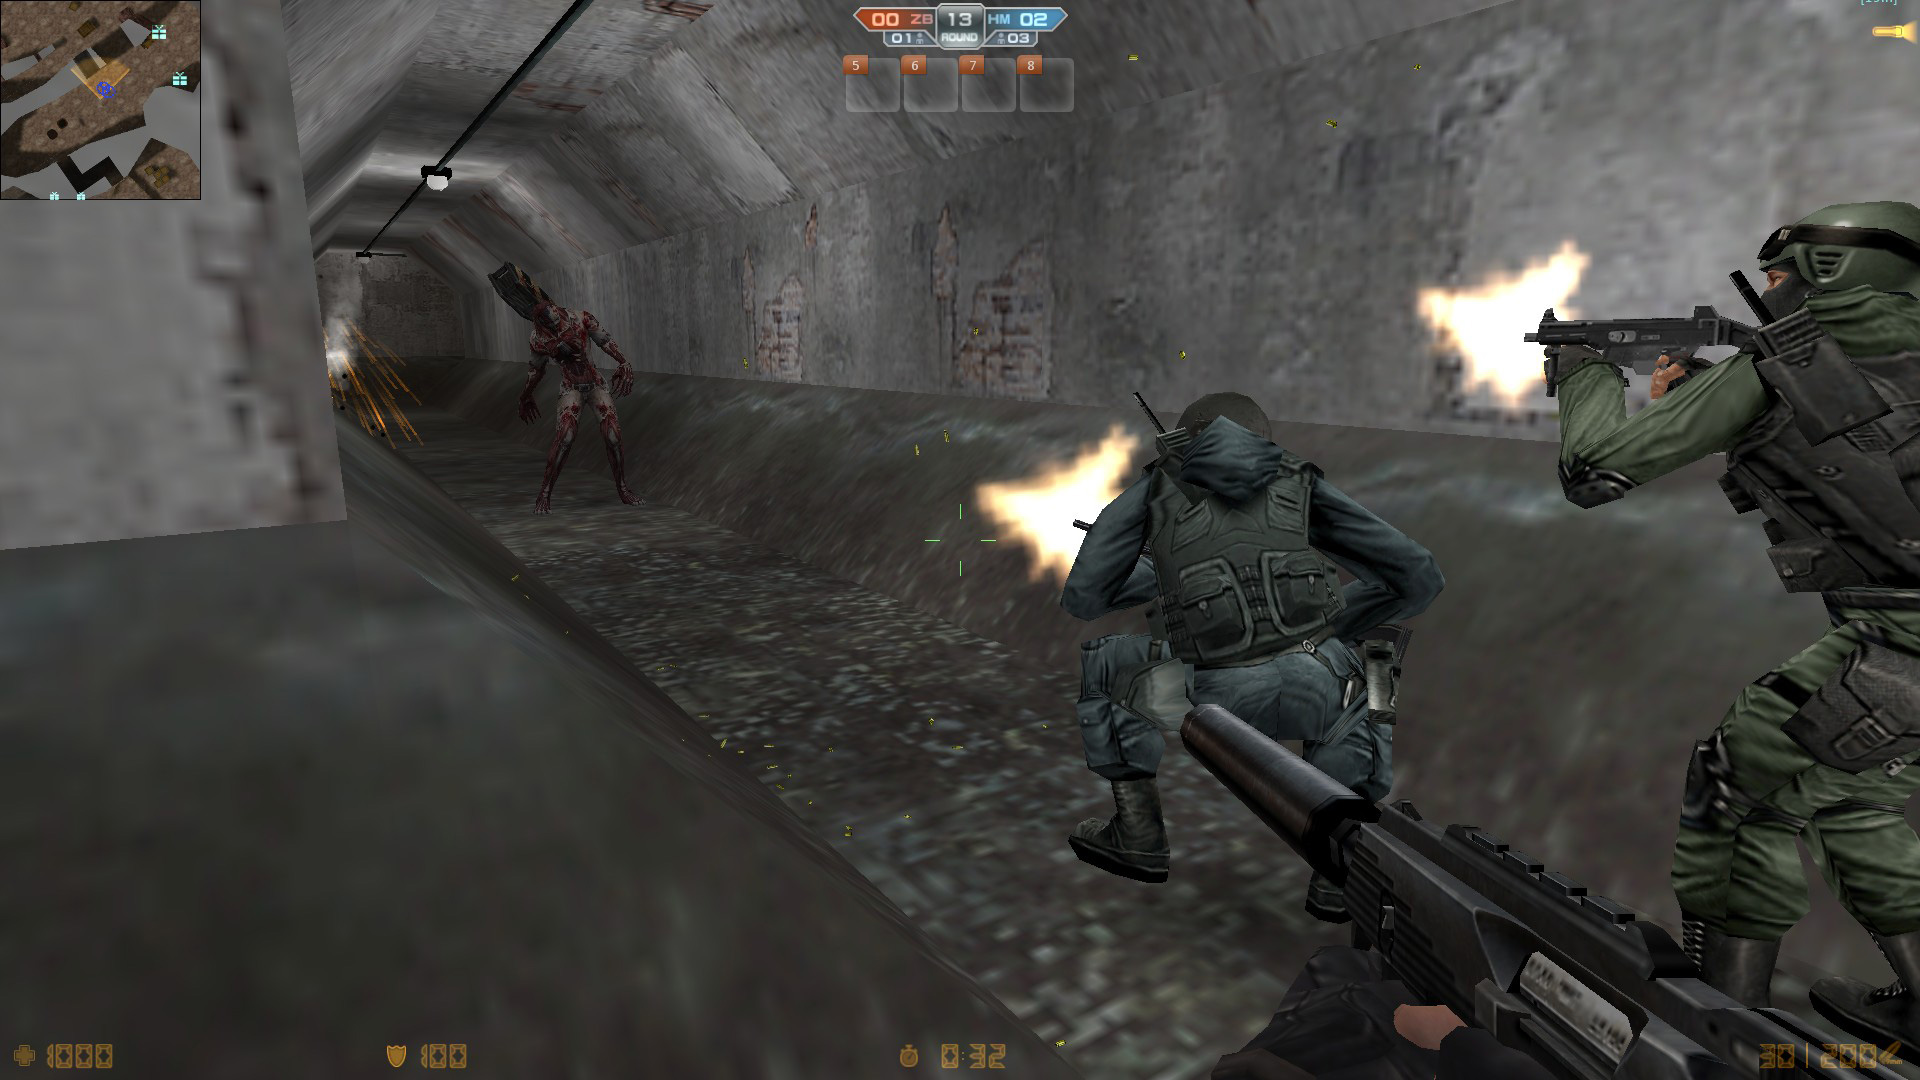 Counter-Strike Nexon Zombies Images 